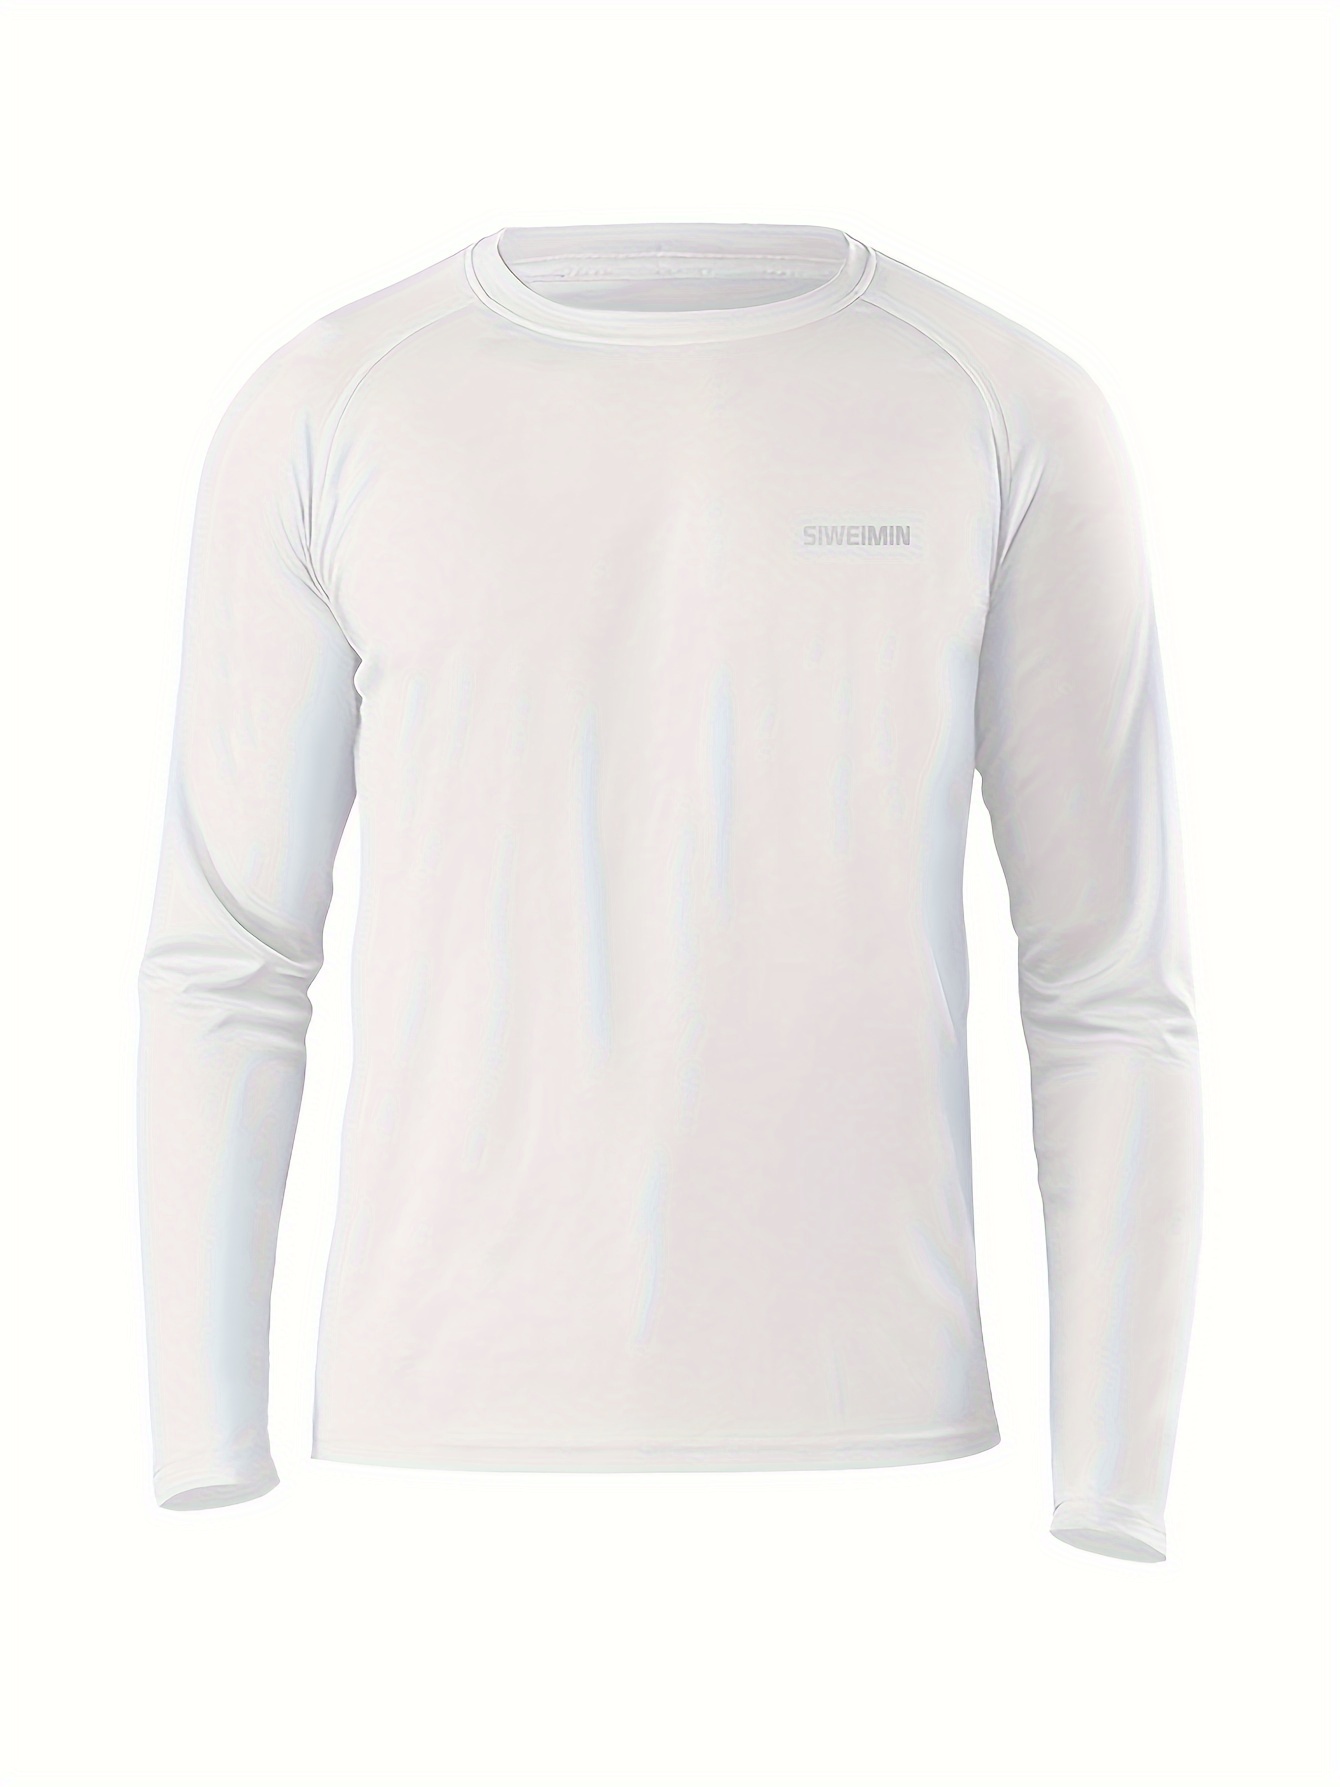 Men's UPF 50+ Sun Protection T-shirt, Long Sleeve Comfy Quick Dry Tops For Men's Outdoor Fishing Activities